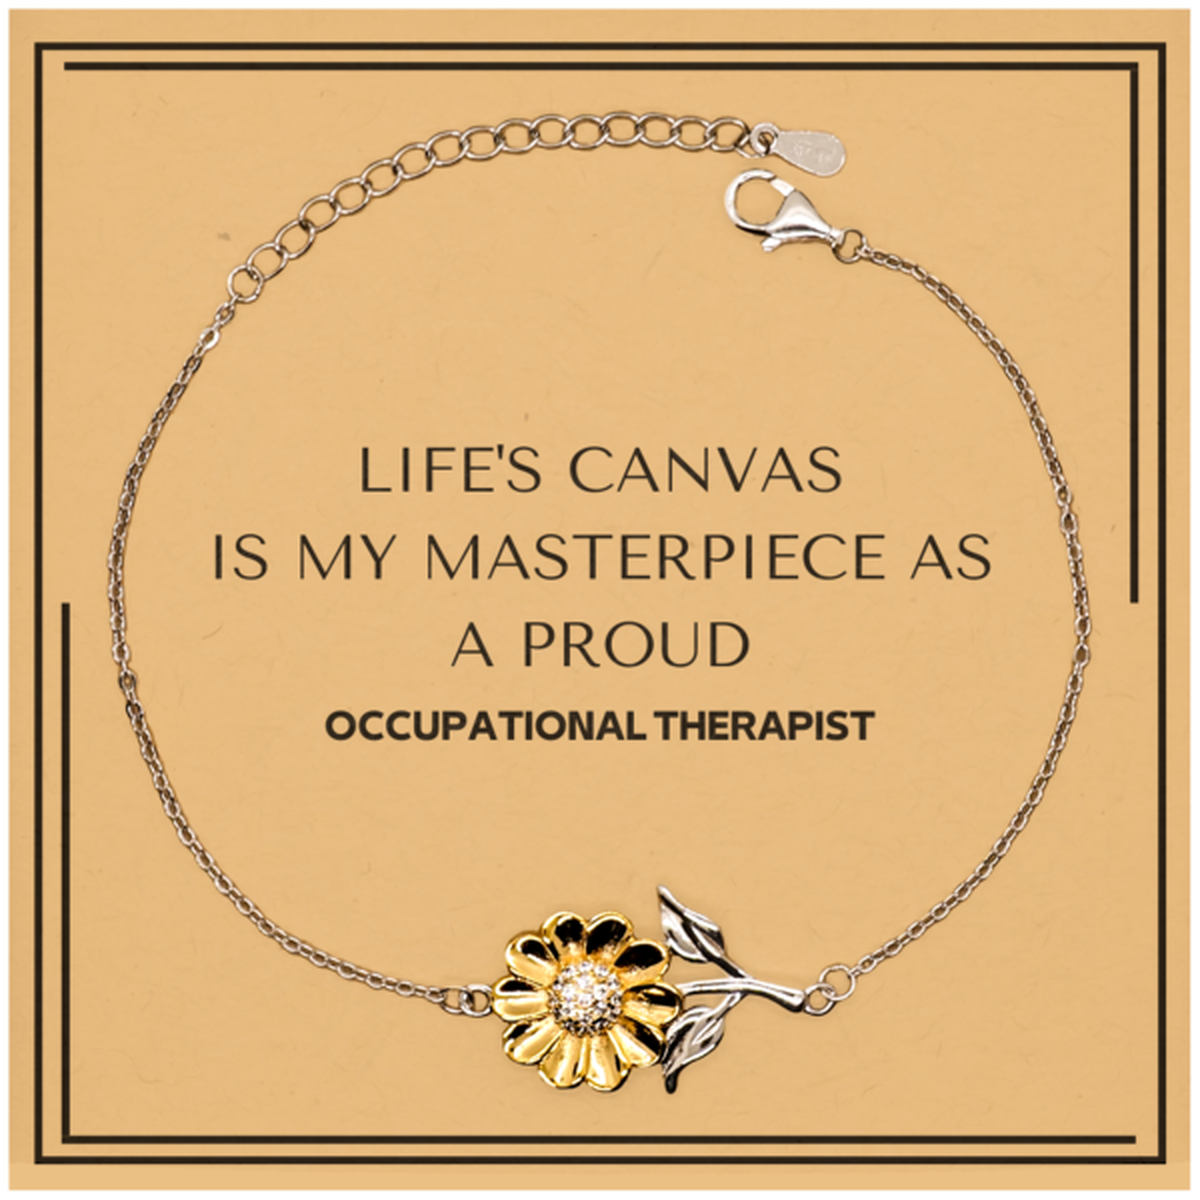 Proud Occupational Therapist Gifts, Life's canvas is my masterpiece, Epic Birthday Christmas Unique Sunflower Bracelet For Occupational Therapist, Coworkers, Men, Women, Friends